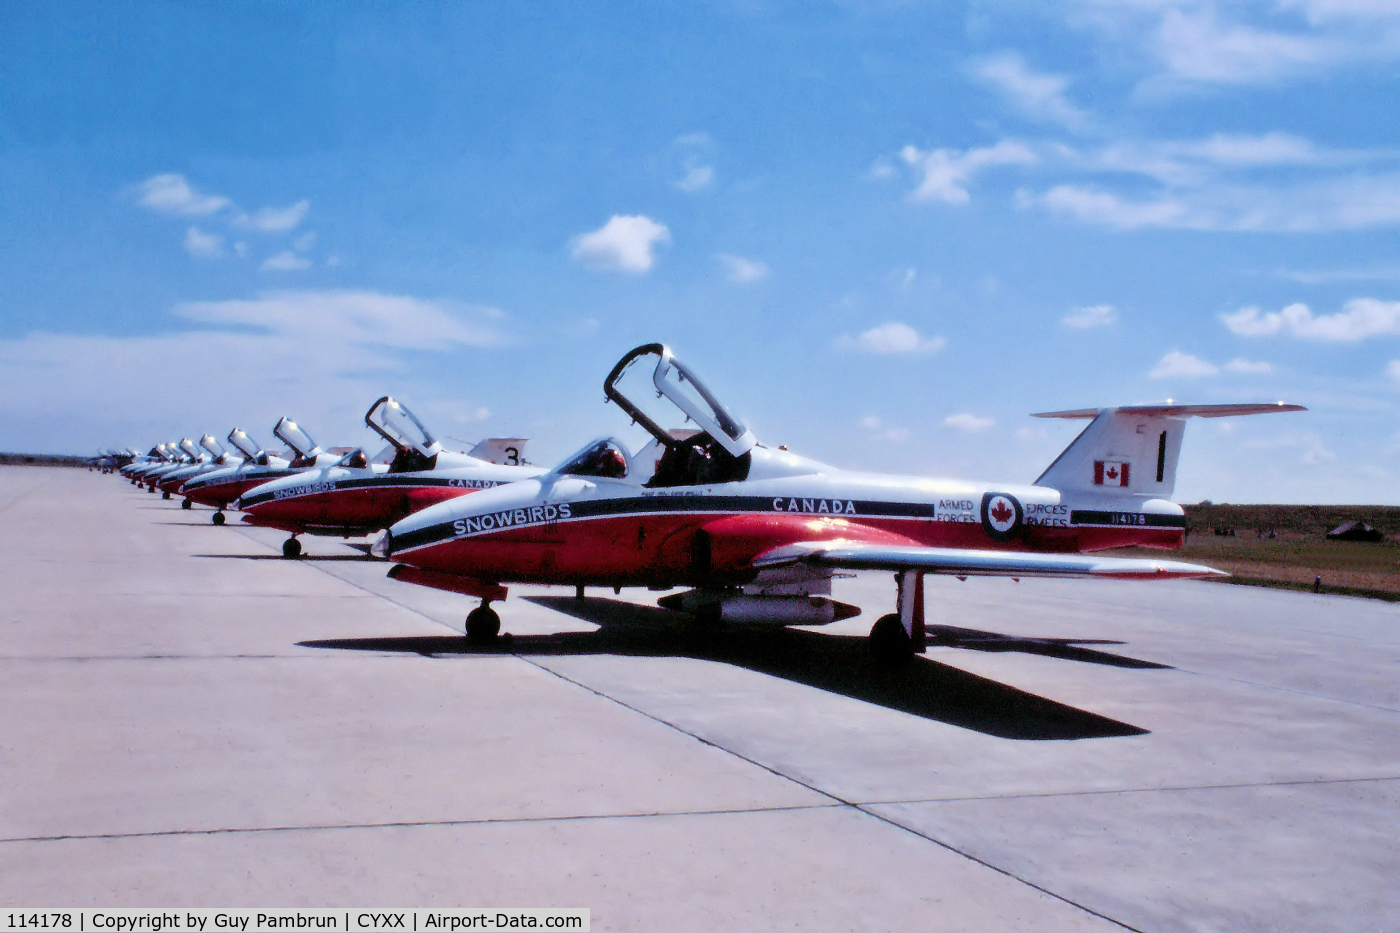 114178, Canadair CT-114 Tutor C/N 1178, CT-114 Tutor Snowbirds demo @ Abbotsford Airshow approx 1975. Scanned from slide.